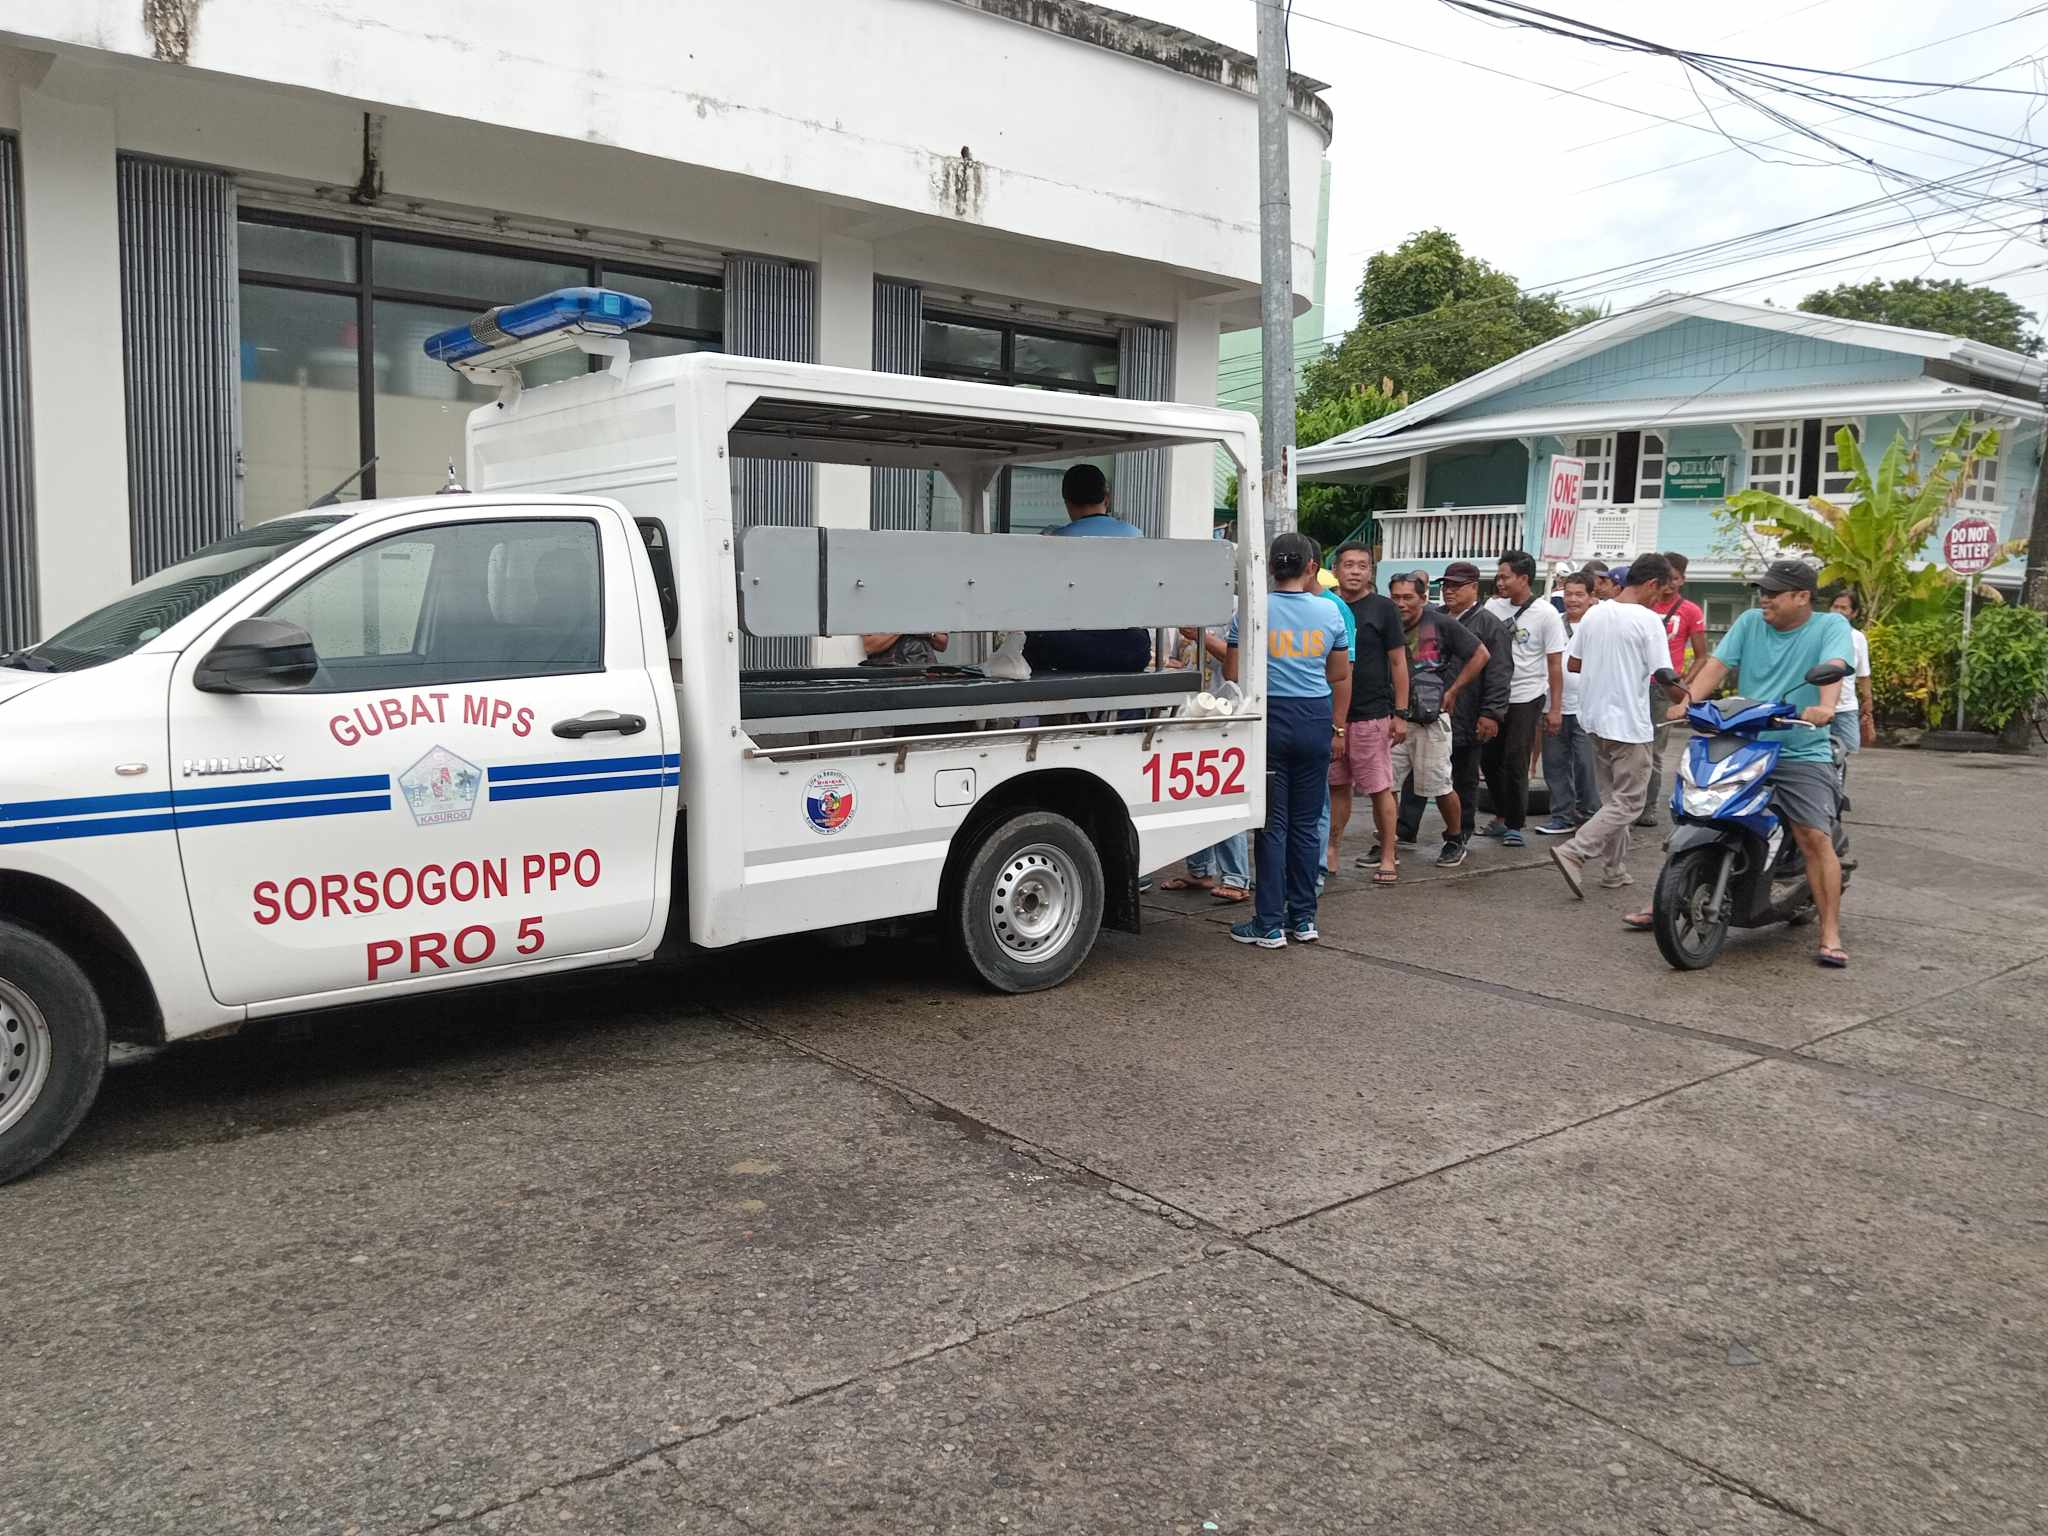 Sorsogon town police give free bread, coffee to forge community ties